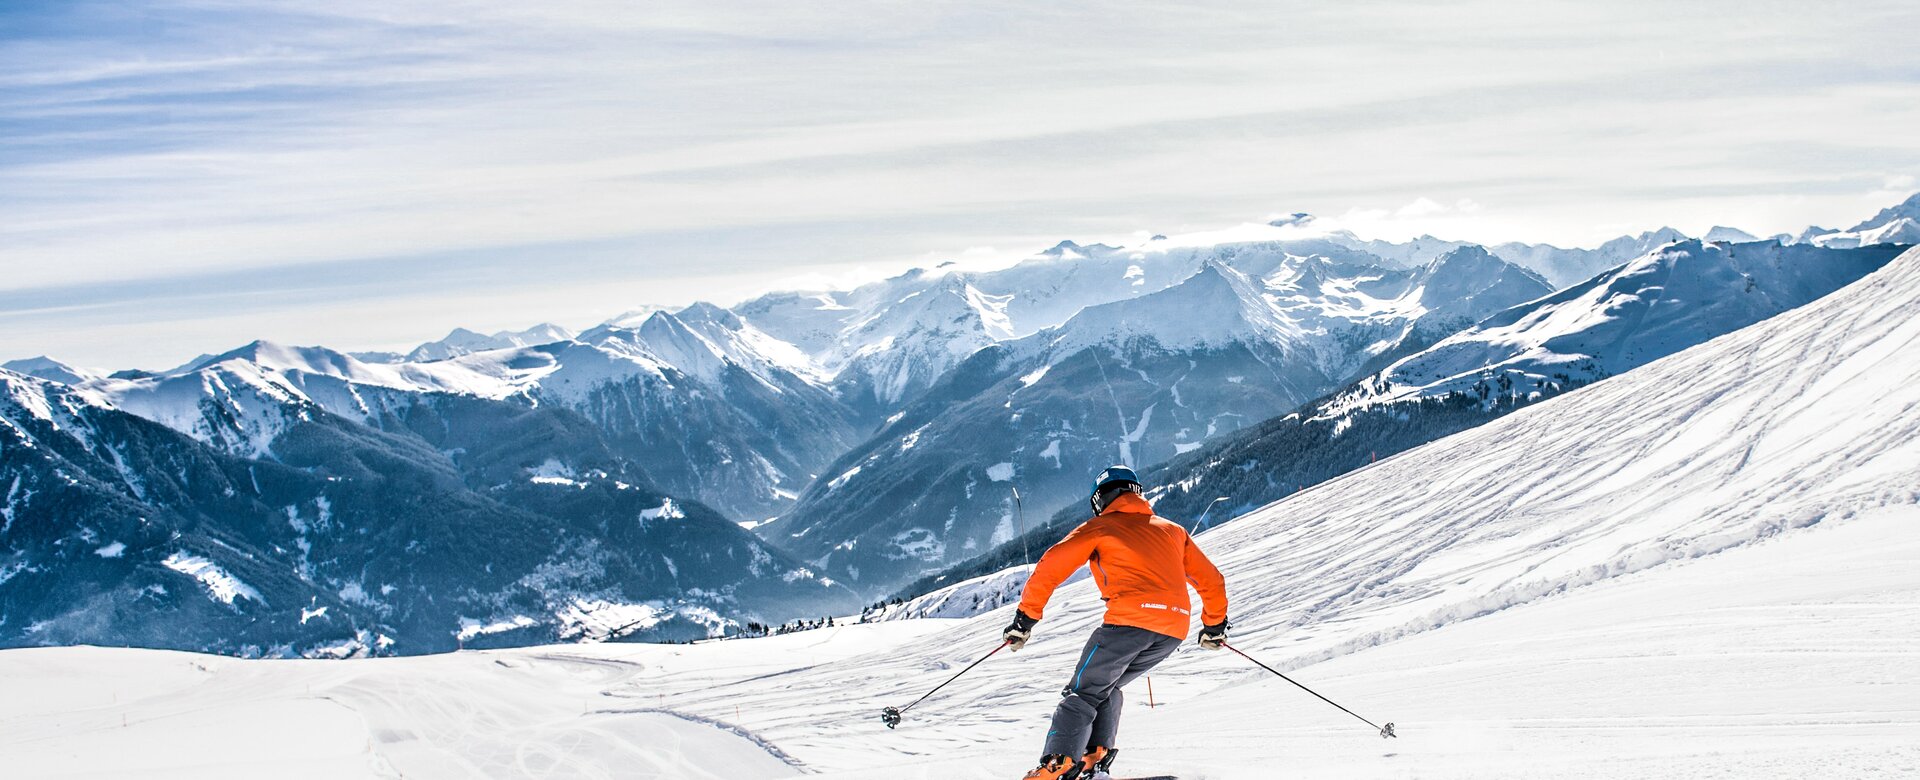 Skier with orange ski jacket descends a groomed slope and snow-capped mountains can be seen in the distance | © Gasteinertal Tourismus GmbH, Creatina